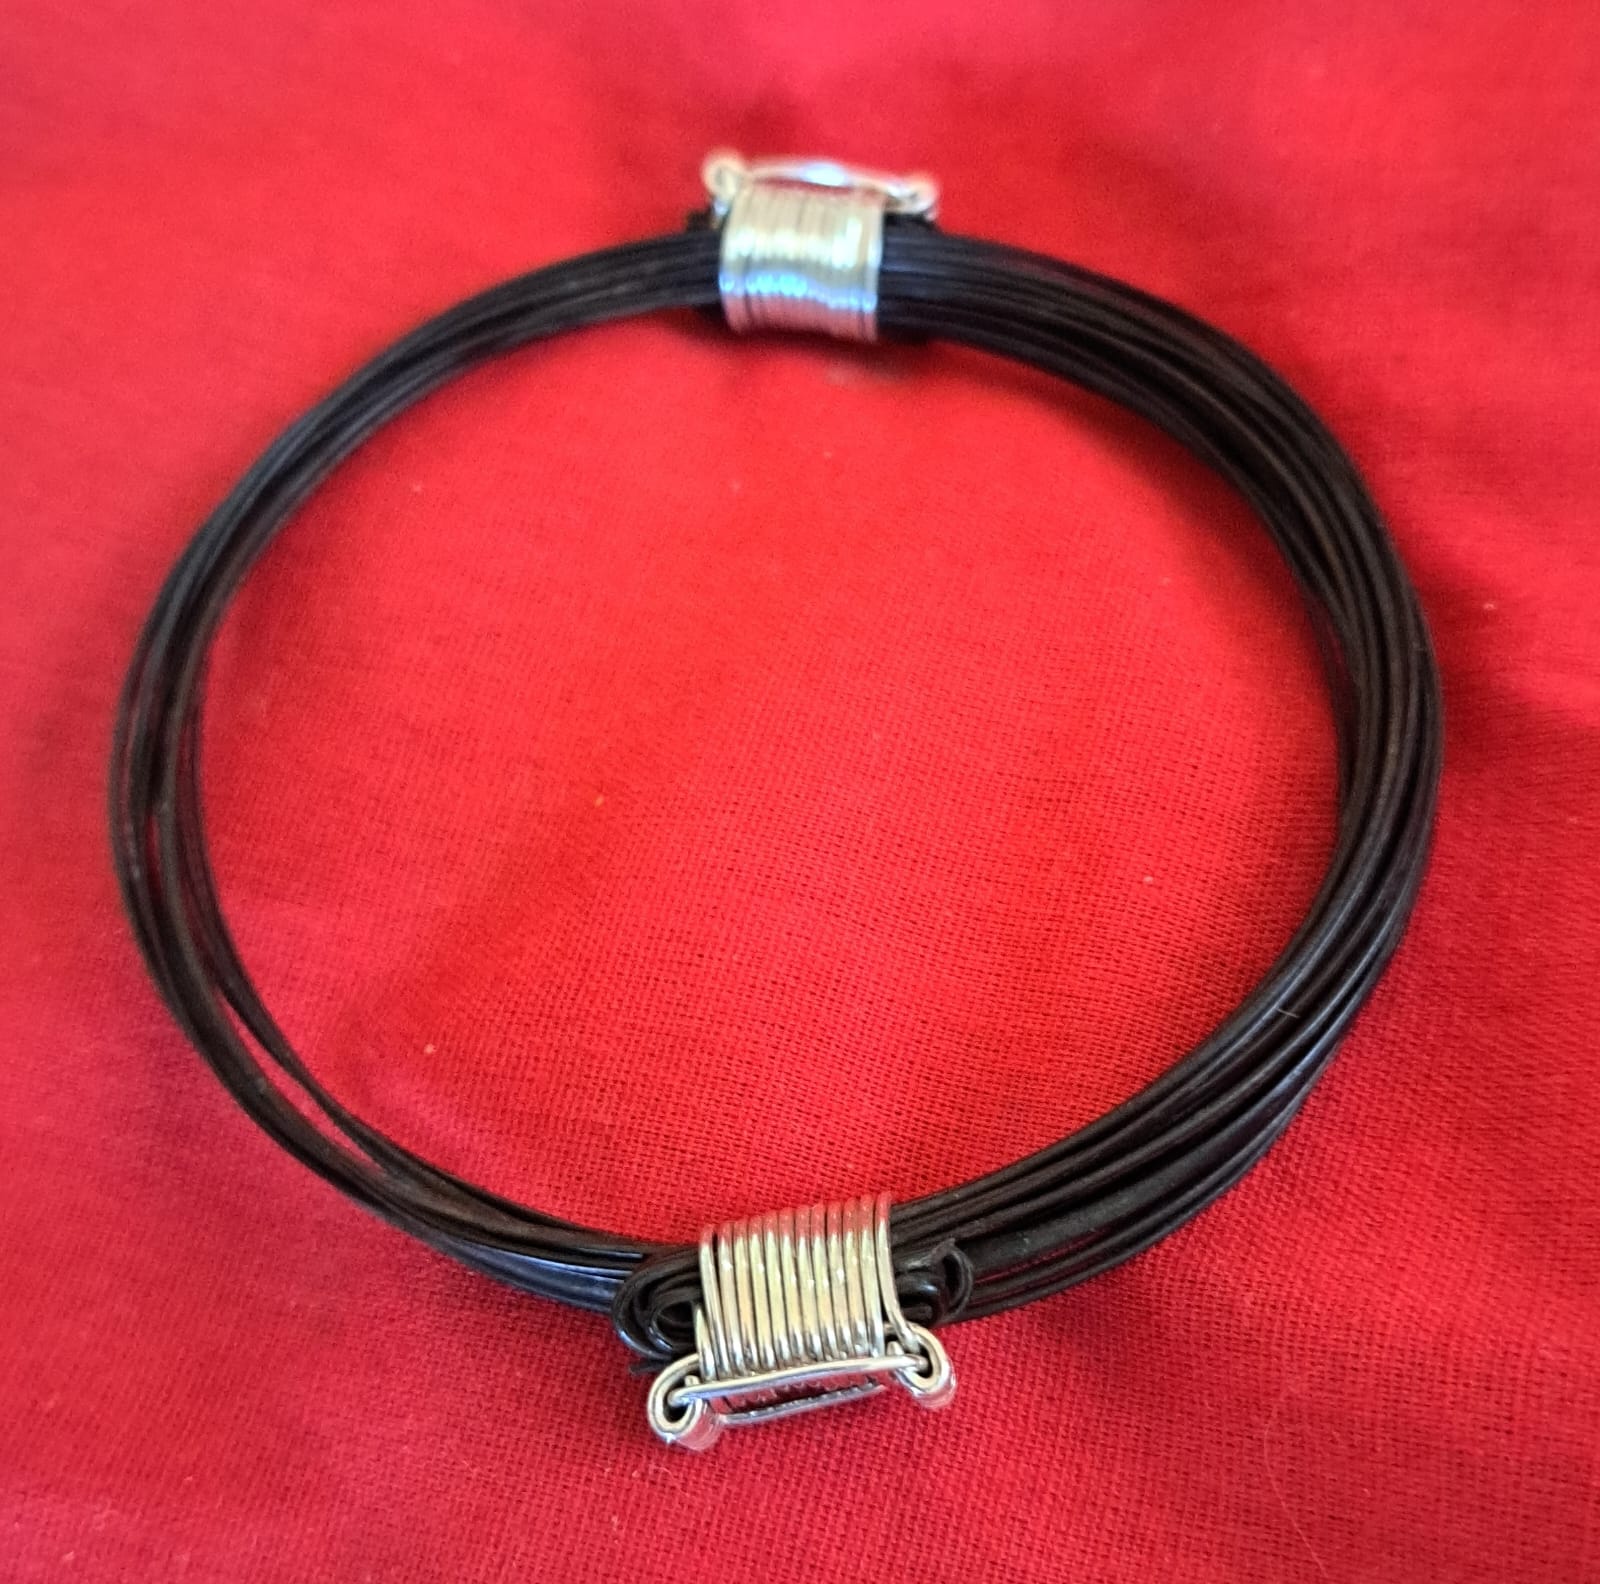 Bracelet made of elephant hair with silver clasp - Catawiki